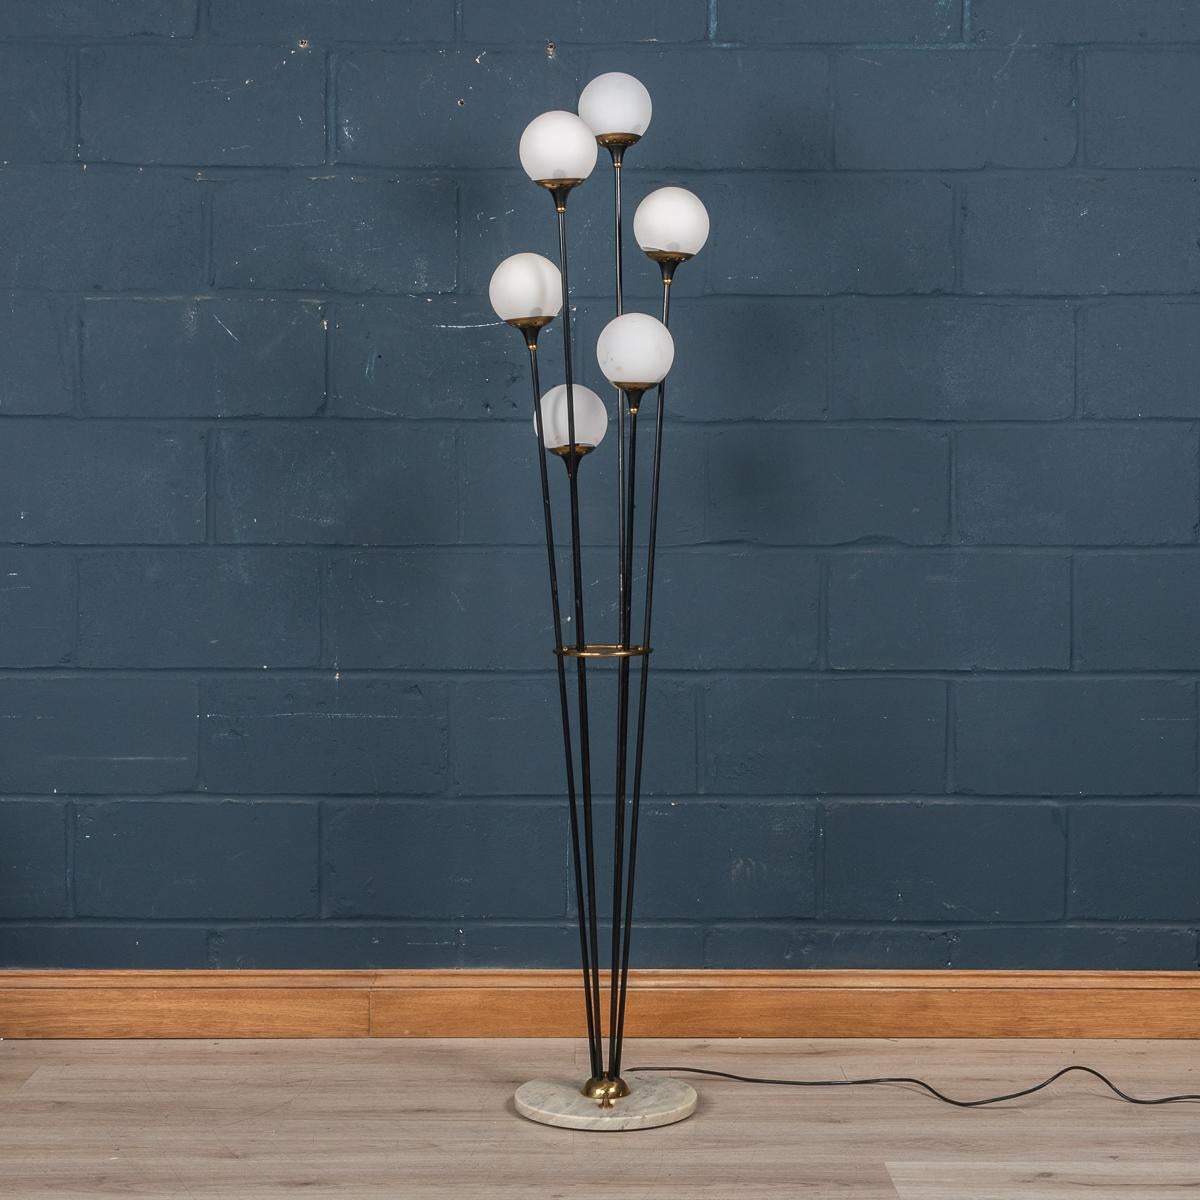 An excellent example of the “Alberello” floor lamp produced by Stilnovo, Milan, Italy. This lamp was produced in the 1960's and does not show its age at all both in terms of looks and condition. Often these lamps are seen with coloured diffusers but